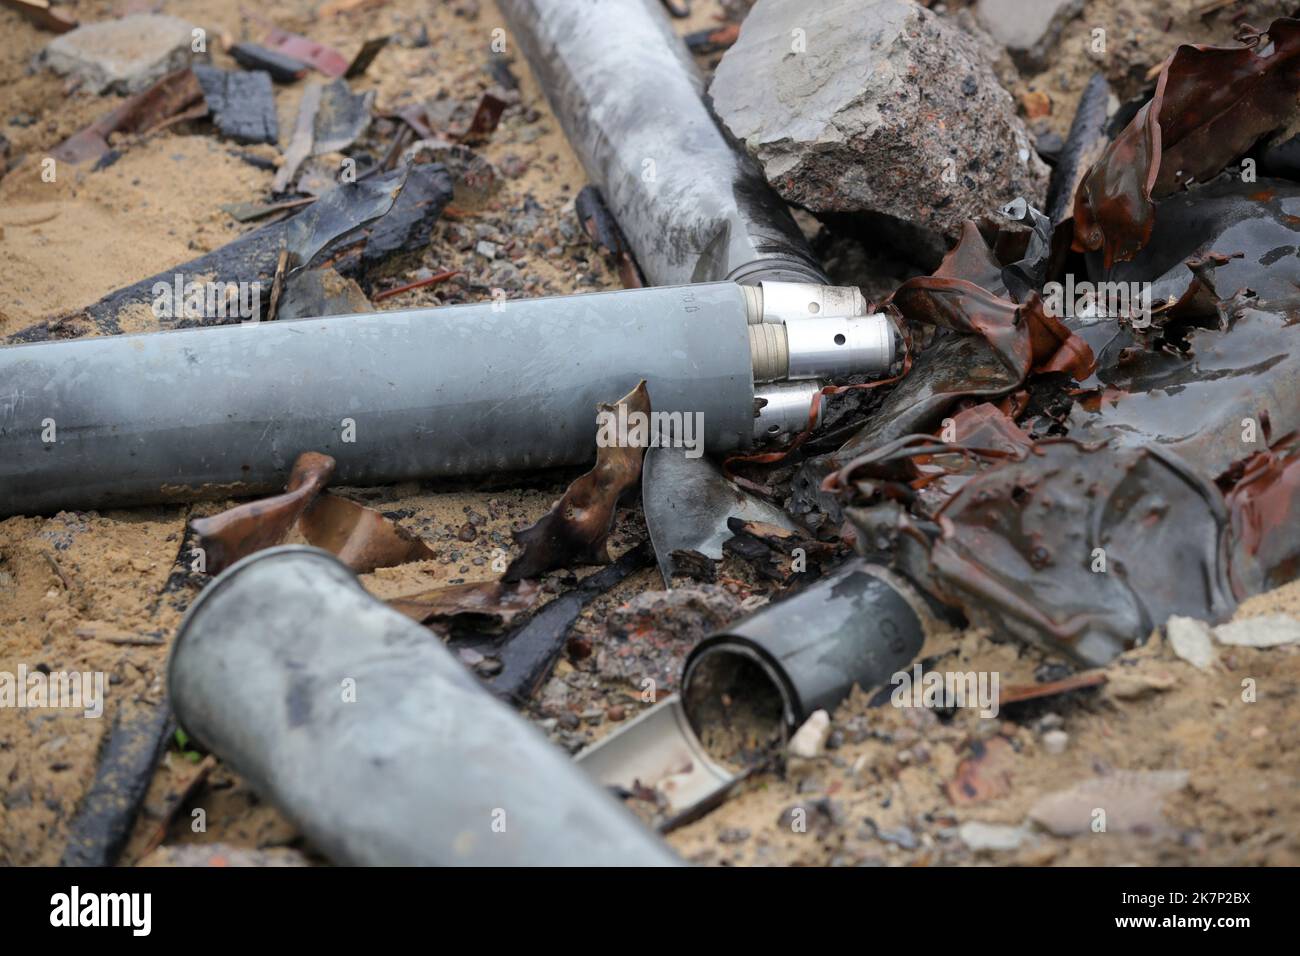 KHARKIV REGION, UKRAINE - OCTOBER 09, 2022 - Fragments of a rocket projectile found on the premises of an ammunition depot abandoned by the russian occupiers, Kharkiv Region, northeastern Ukraine. Stock Photo